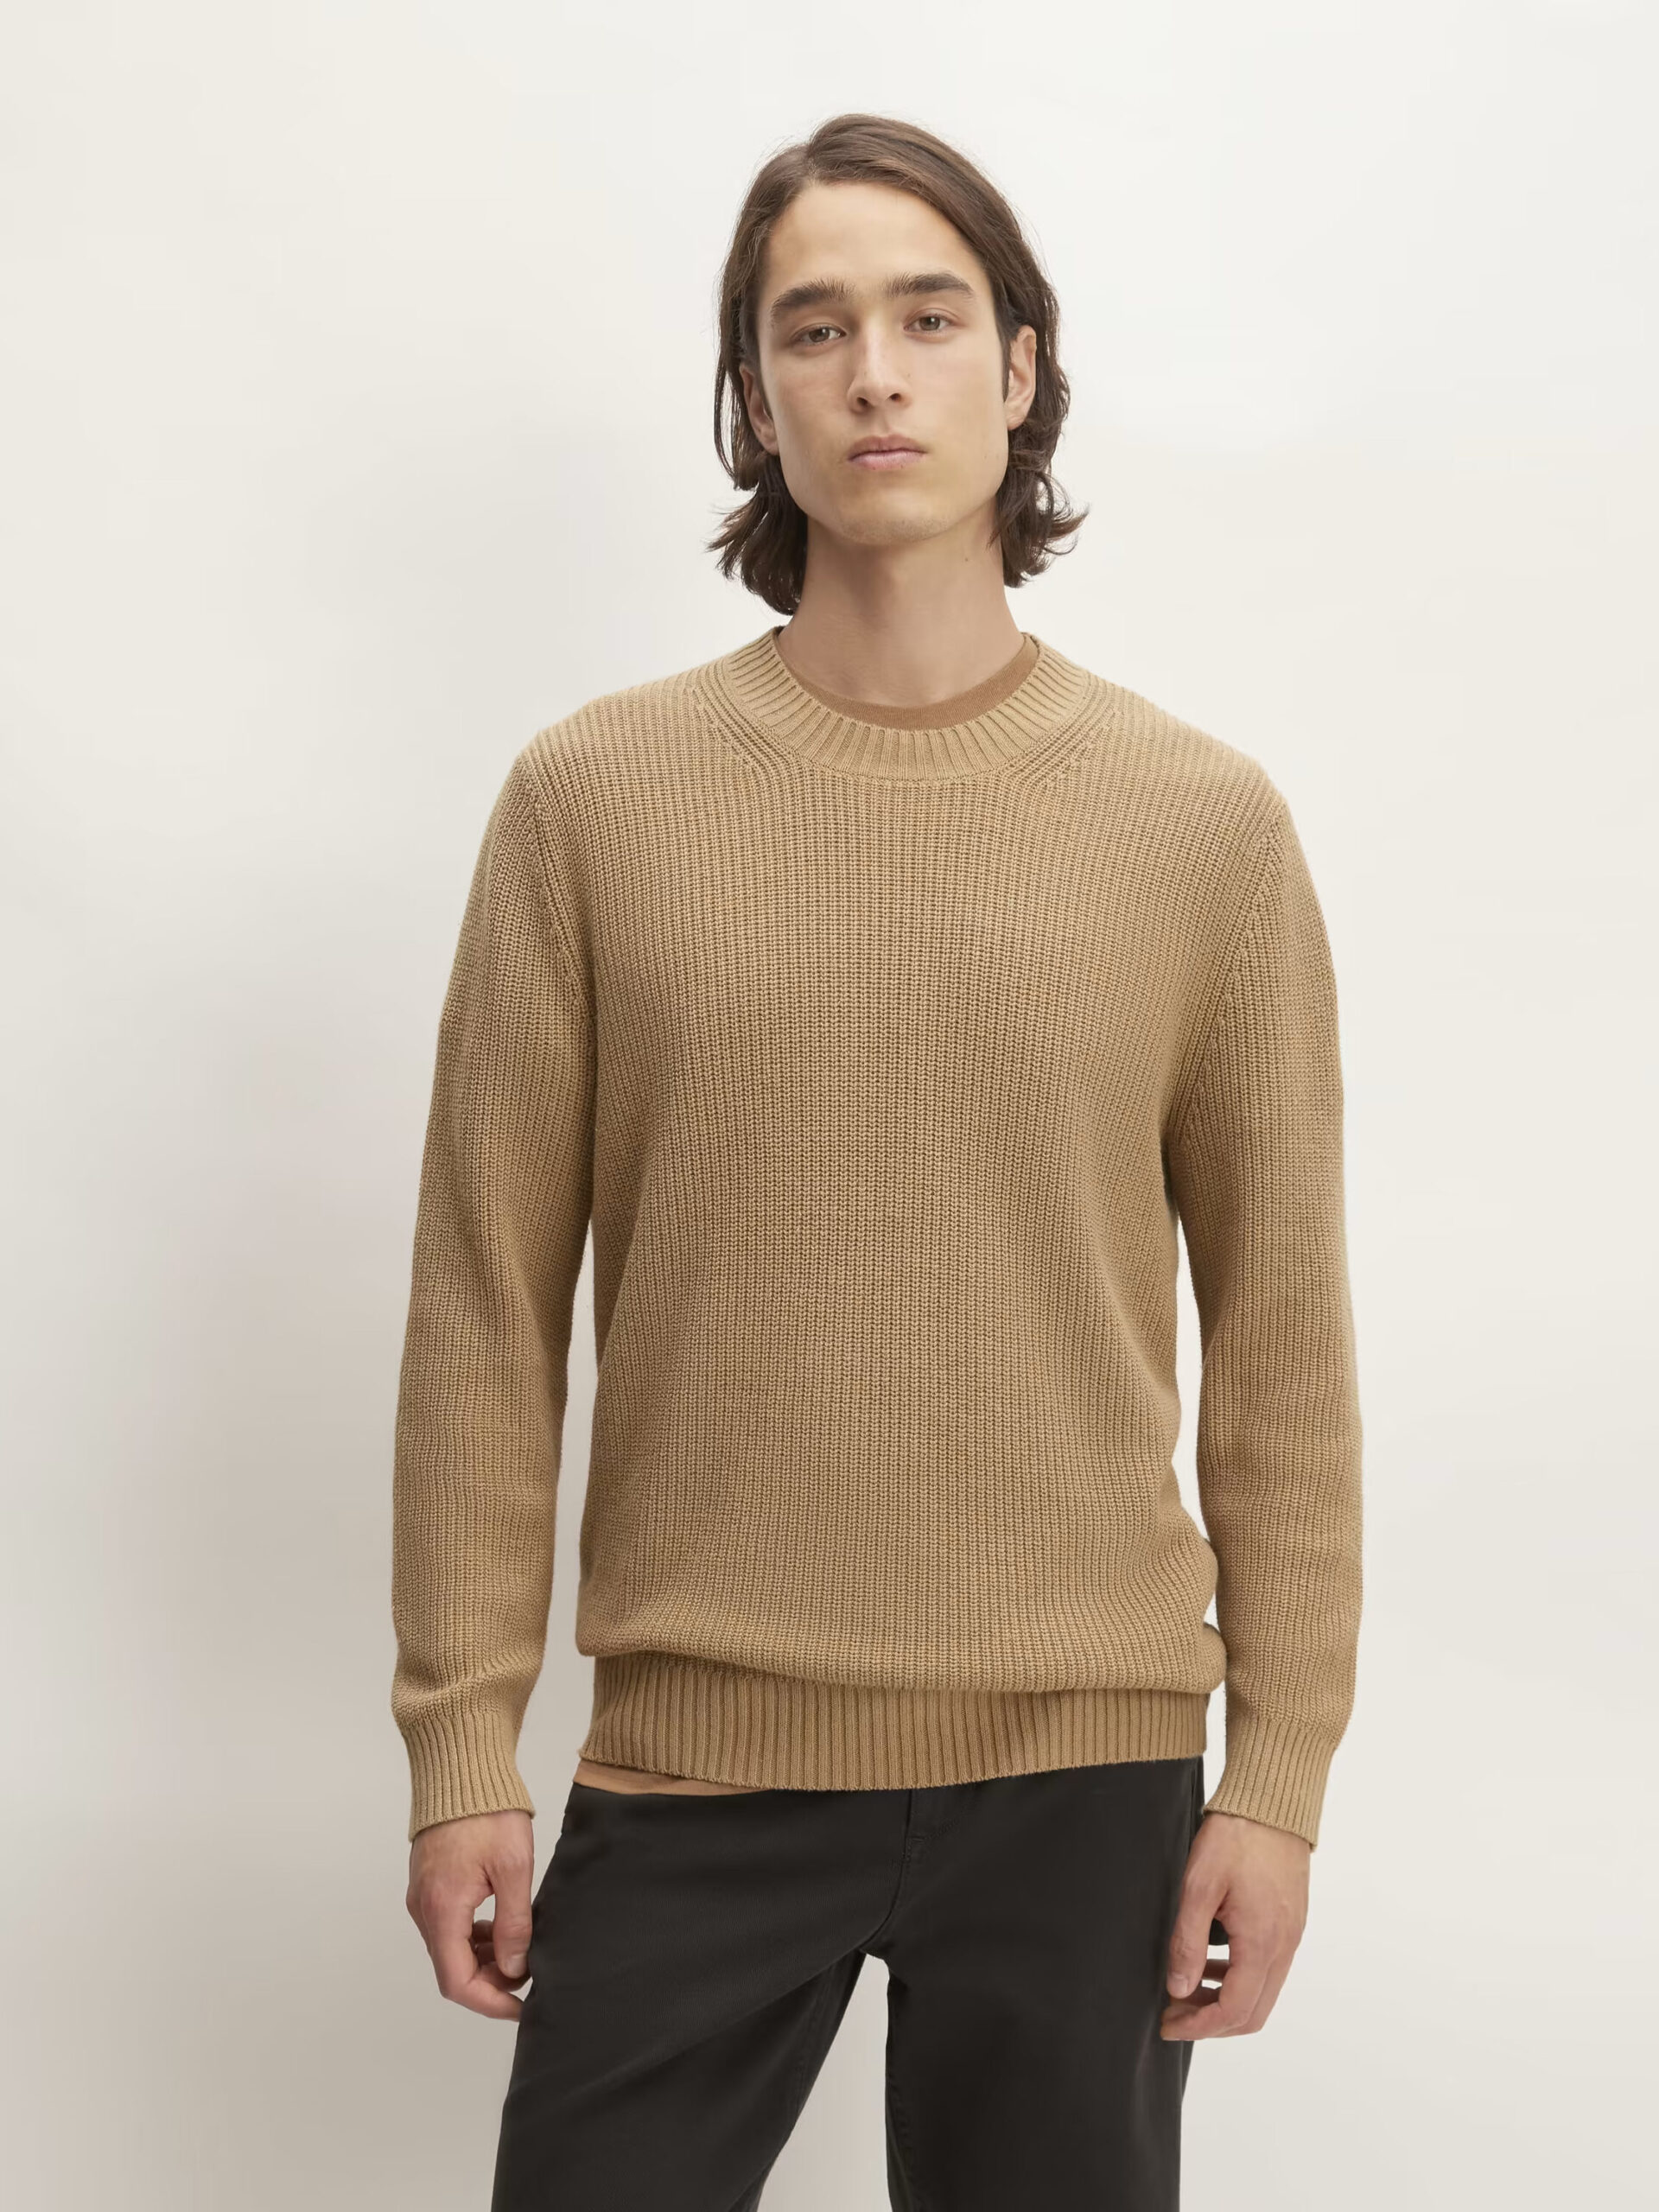 Everlane Men's Affordable Sustainable Clothing